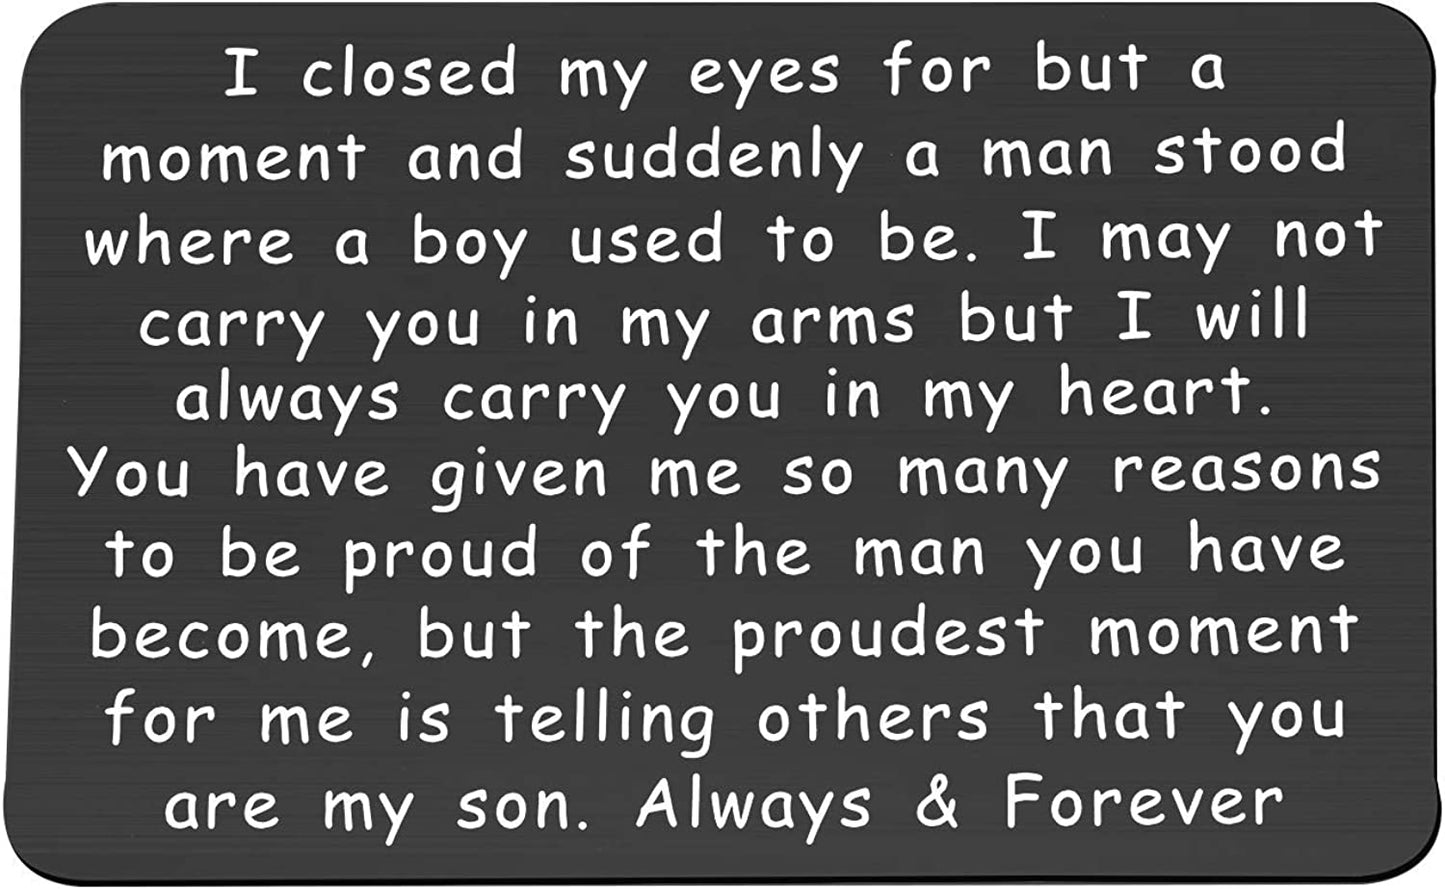 Wallet Card Proud of You Gifts I Closed My Eyes for A Moment Engraved Wallet Card for Son for Men